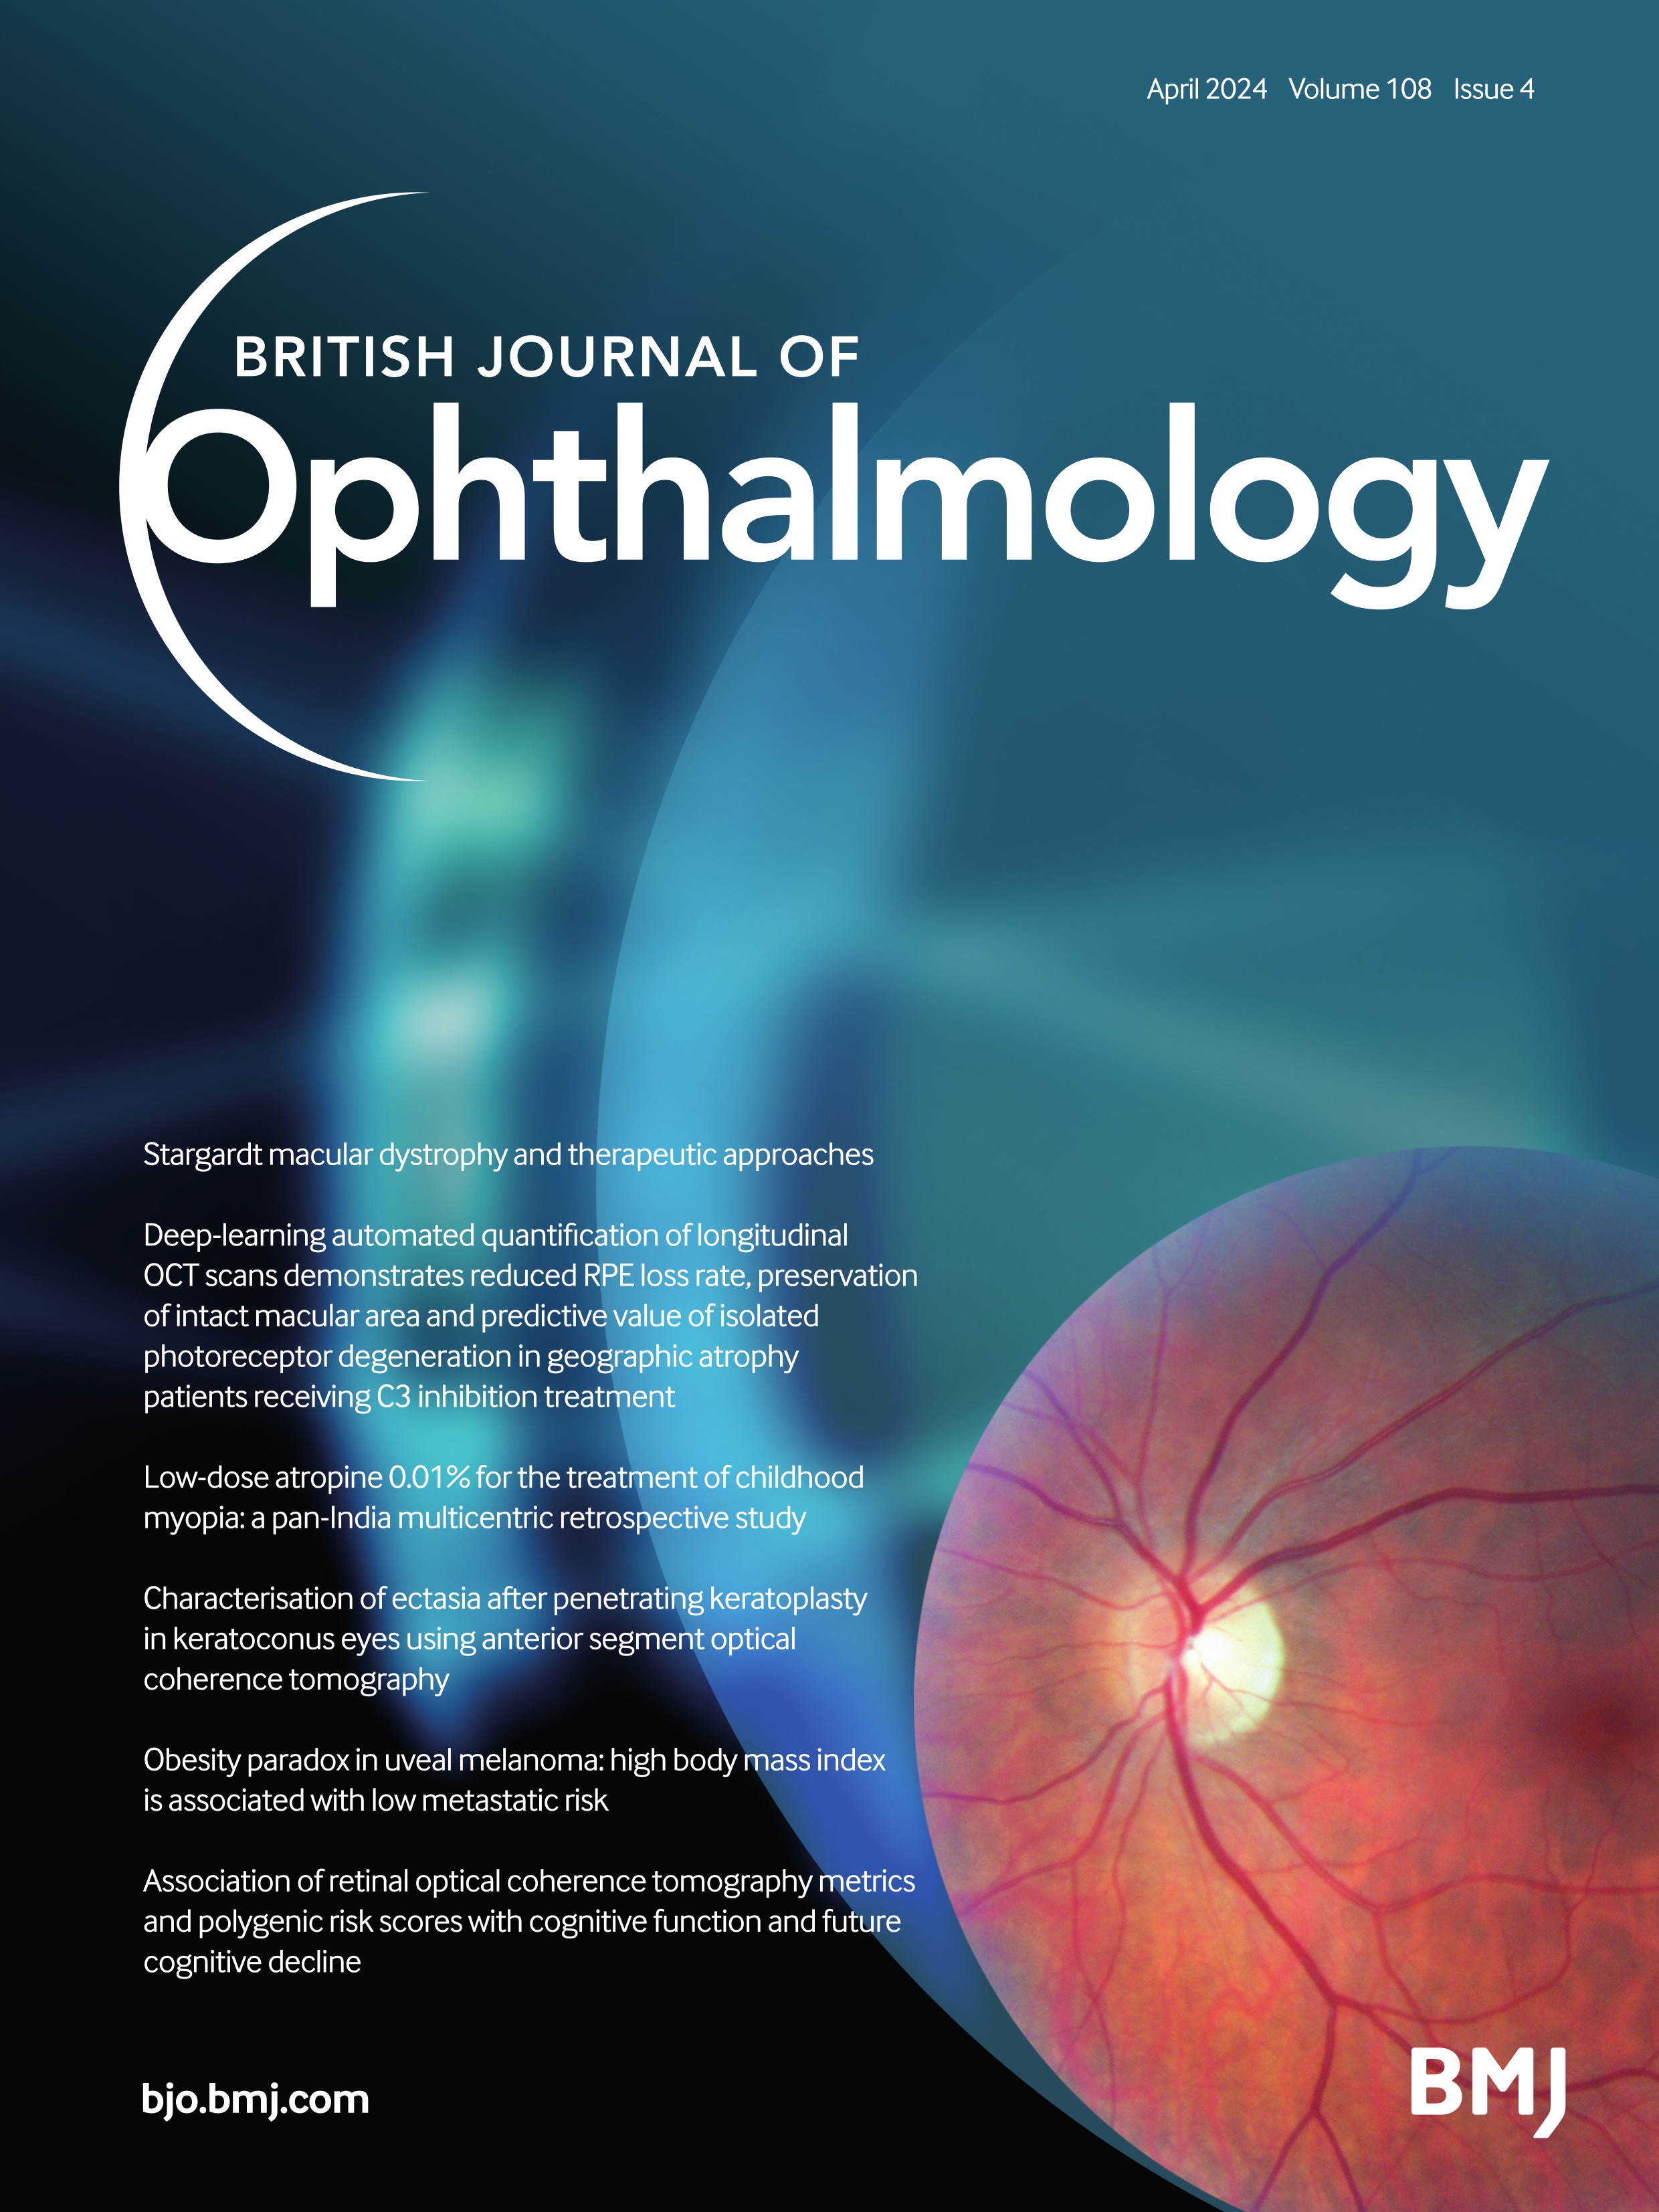 Low-dose atropine 0.01% for the treatment of childhood myopia: a pan-India multicentric retrospective study